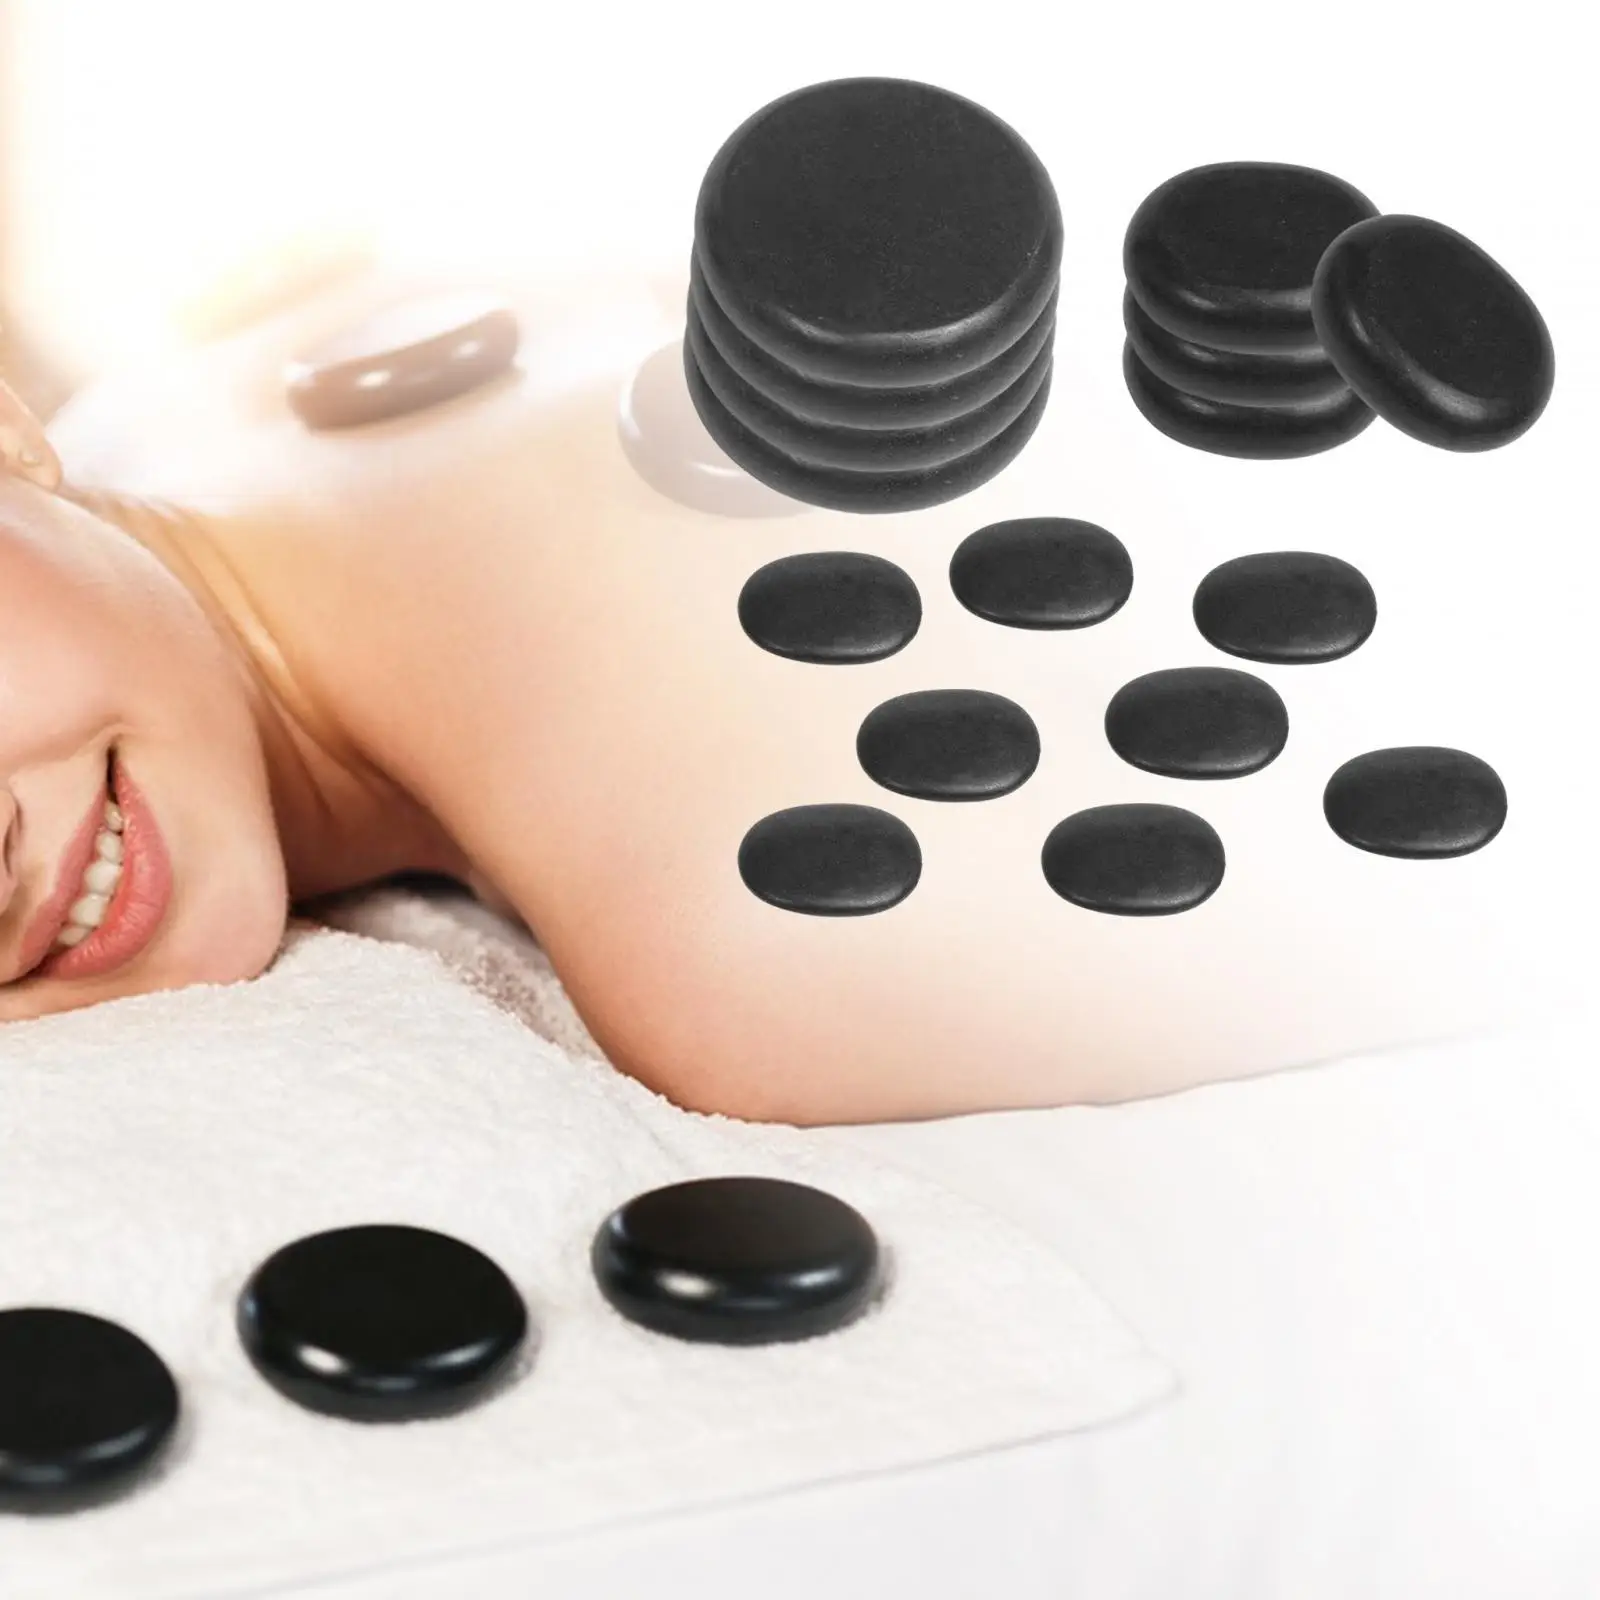 16x Hot Stone Massage Set SPA Stones Easy to Clean Portable Beauty Tools Relaxation